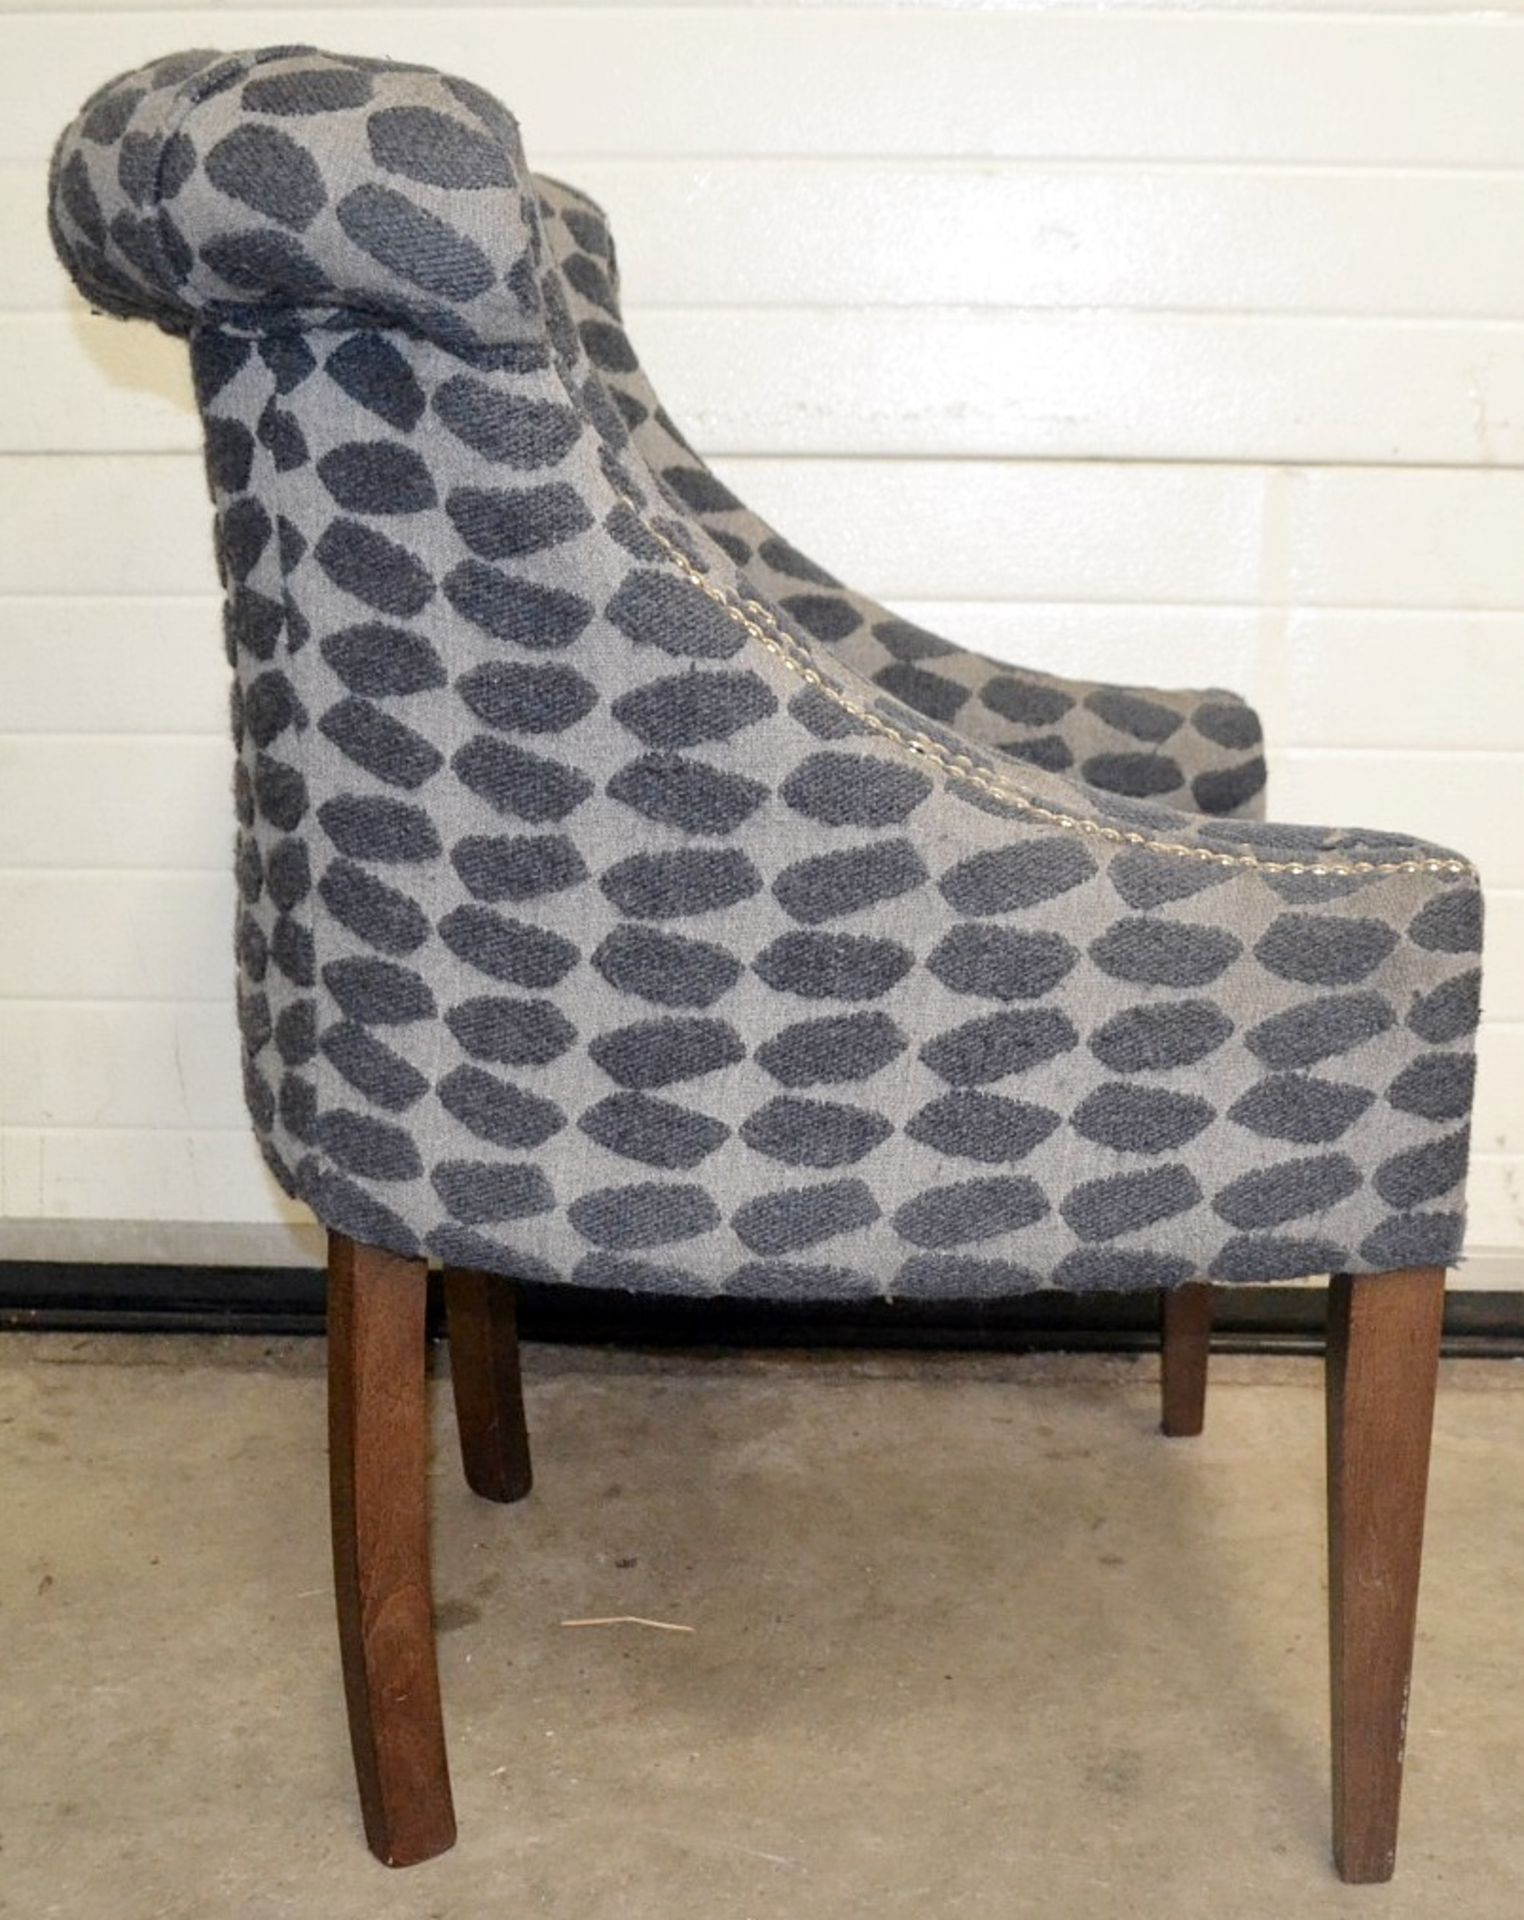 4 x Blue & Grey Upholstered Bar Chairs For Commercial Use - Dimensions (cm): W70 x D60, Back - Image 5 of 6